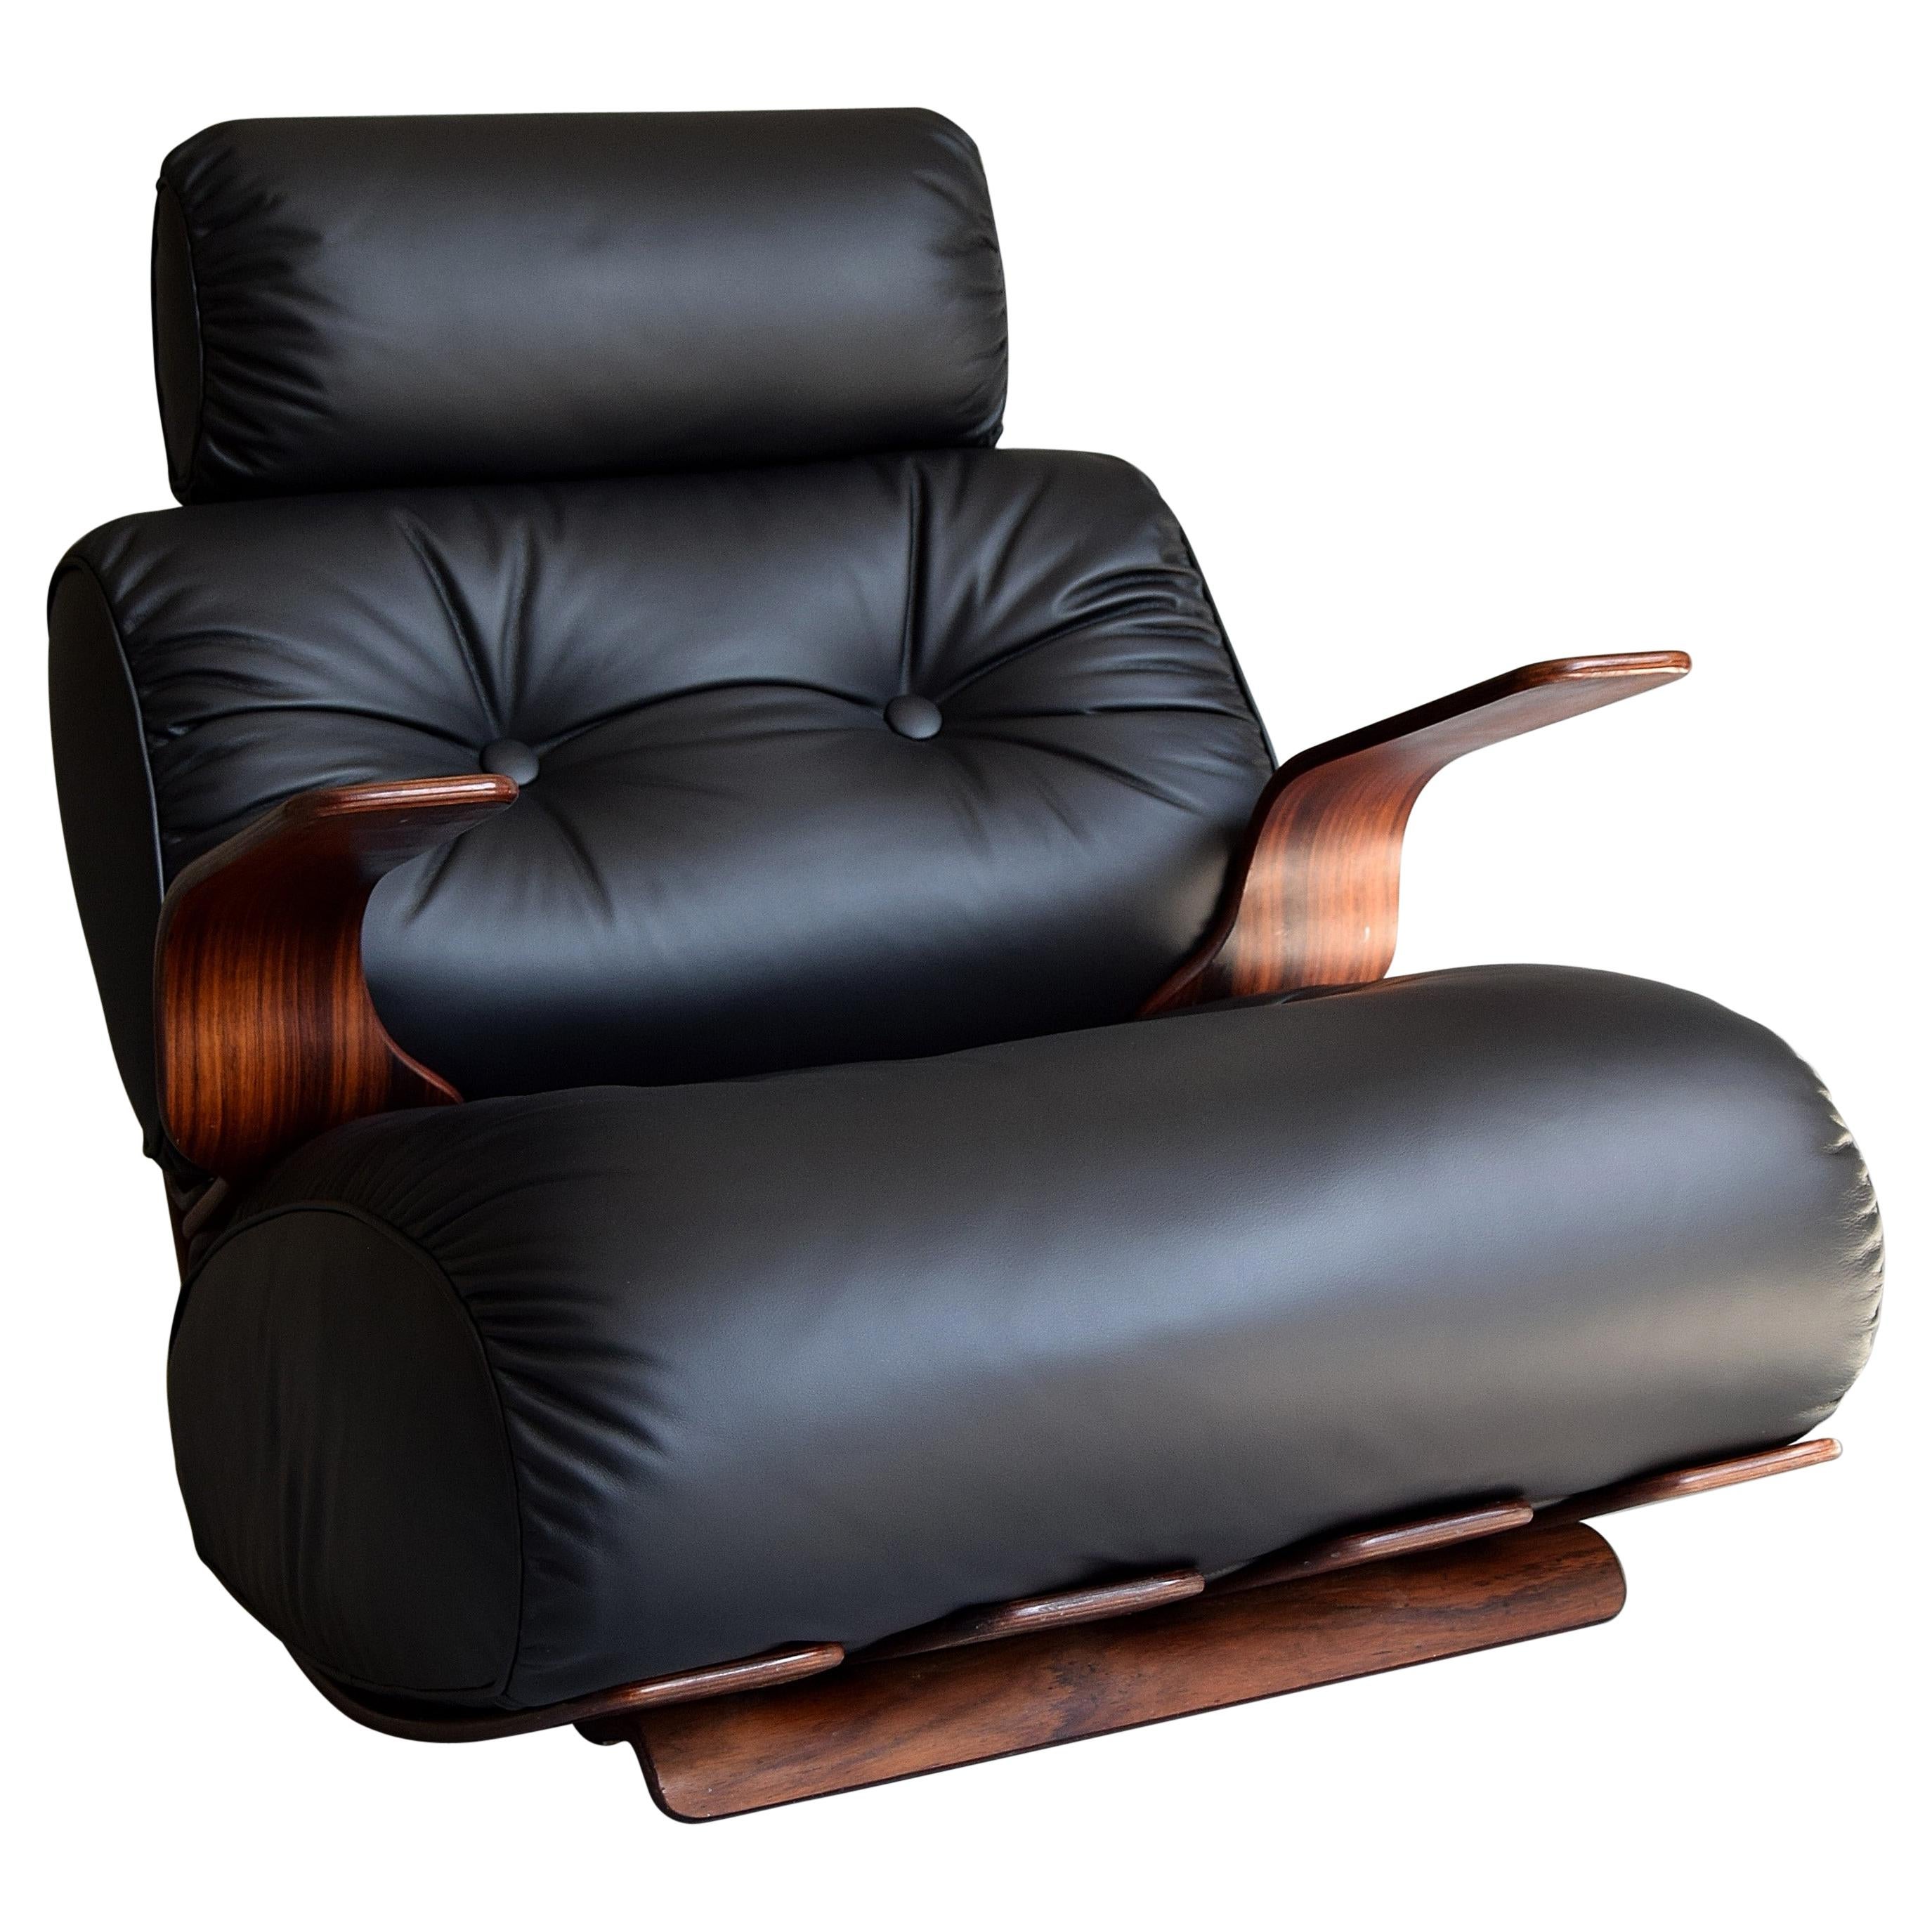 Stylish and extremely comfortable lounge / rocking chair made in the 1970s. The chair has a sophisticated plywood bended frame with a deep and warm grain rosewood veneer.
The newly, with high quality soft black leather, upholstered cushions